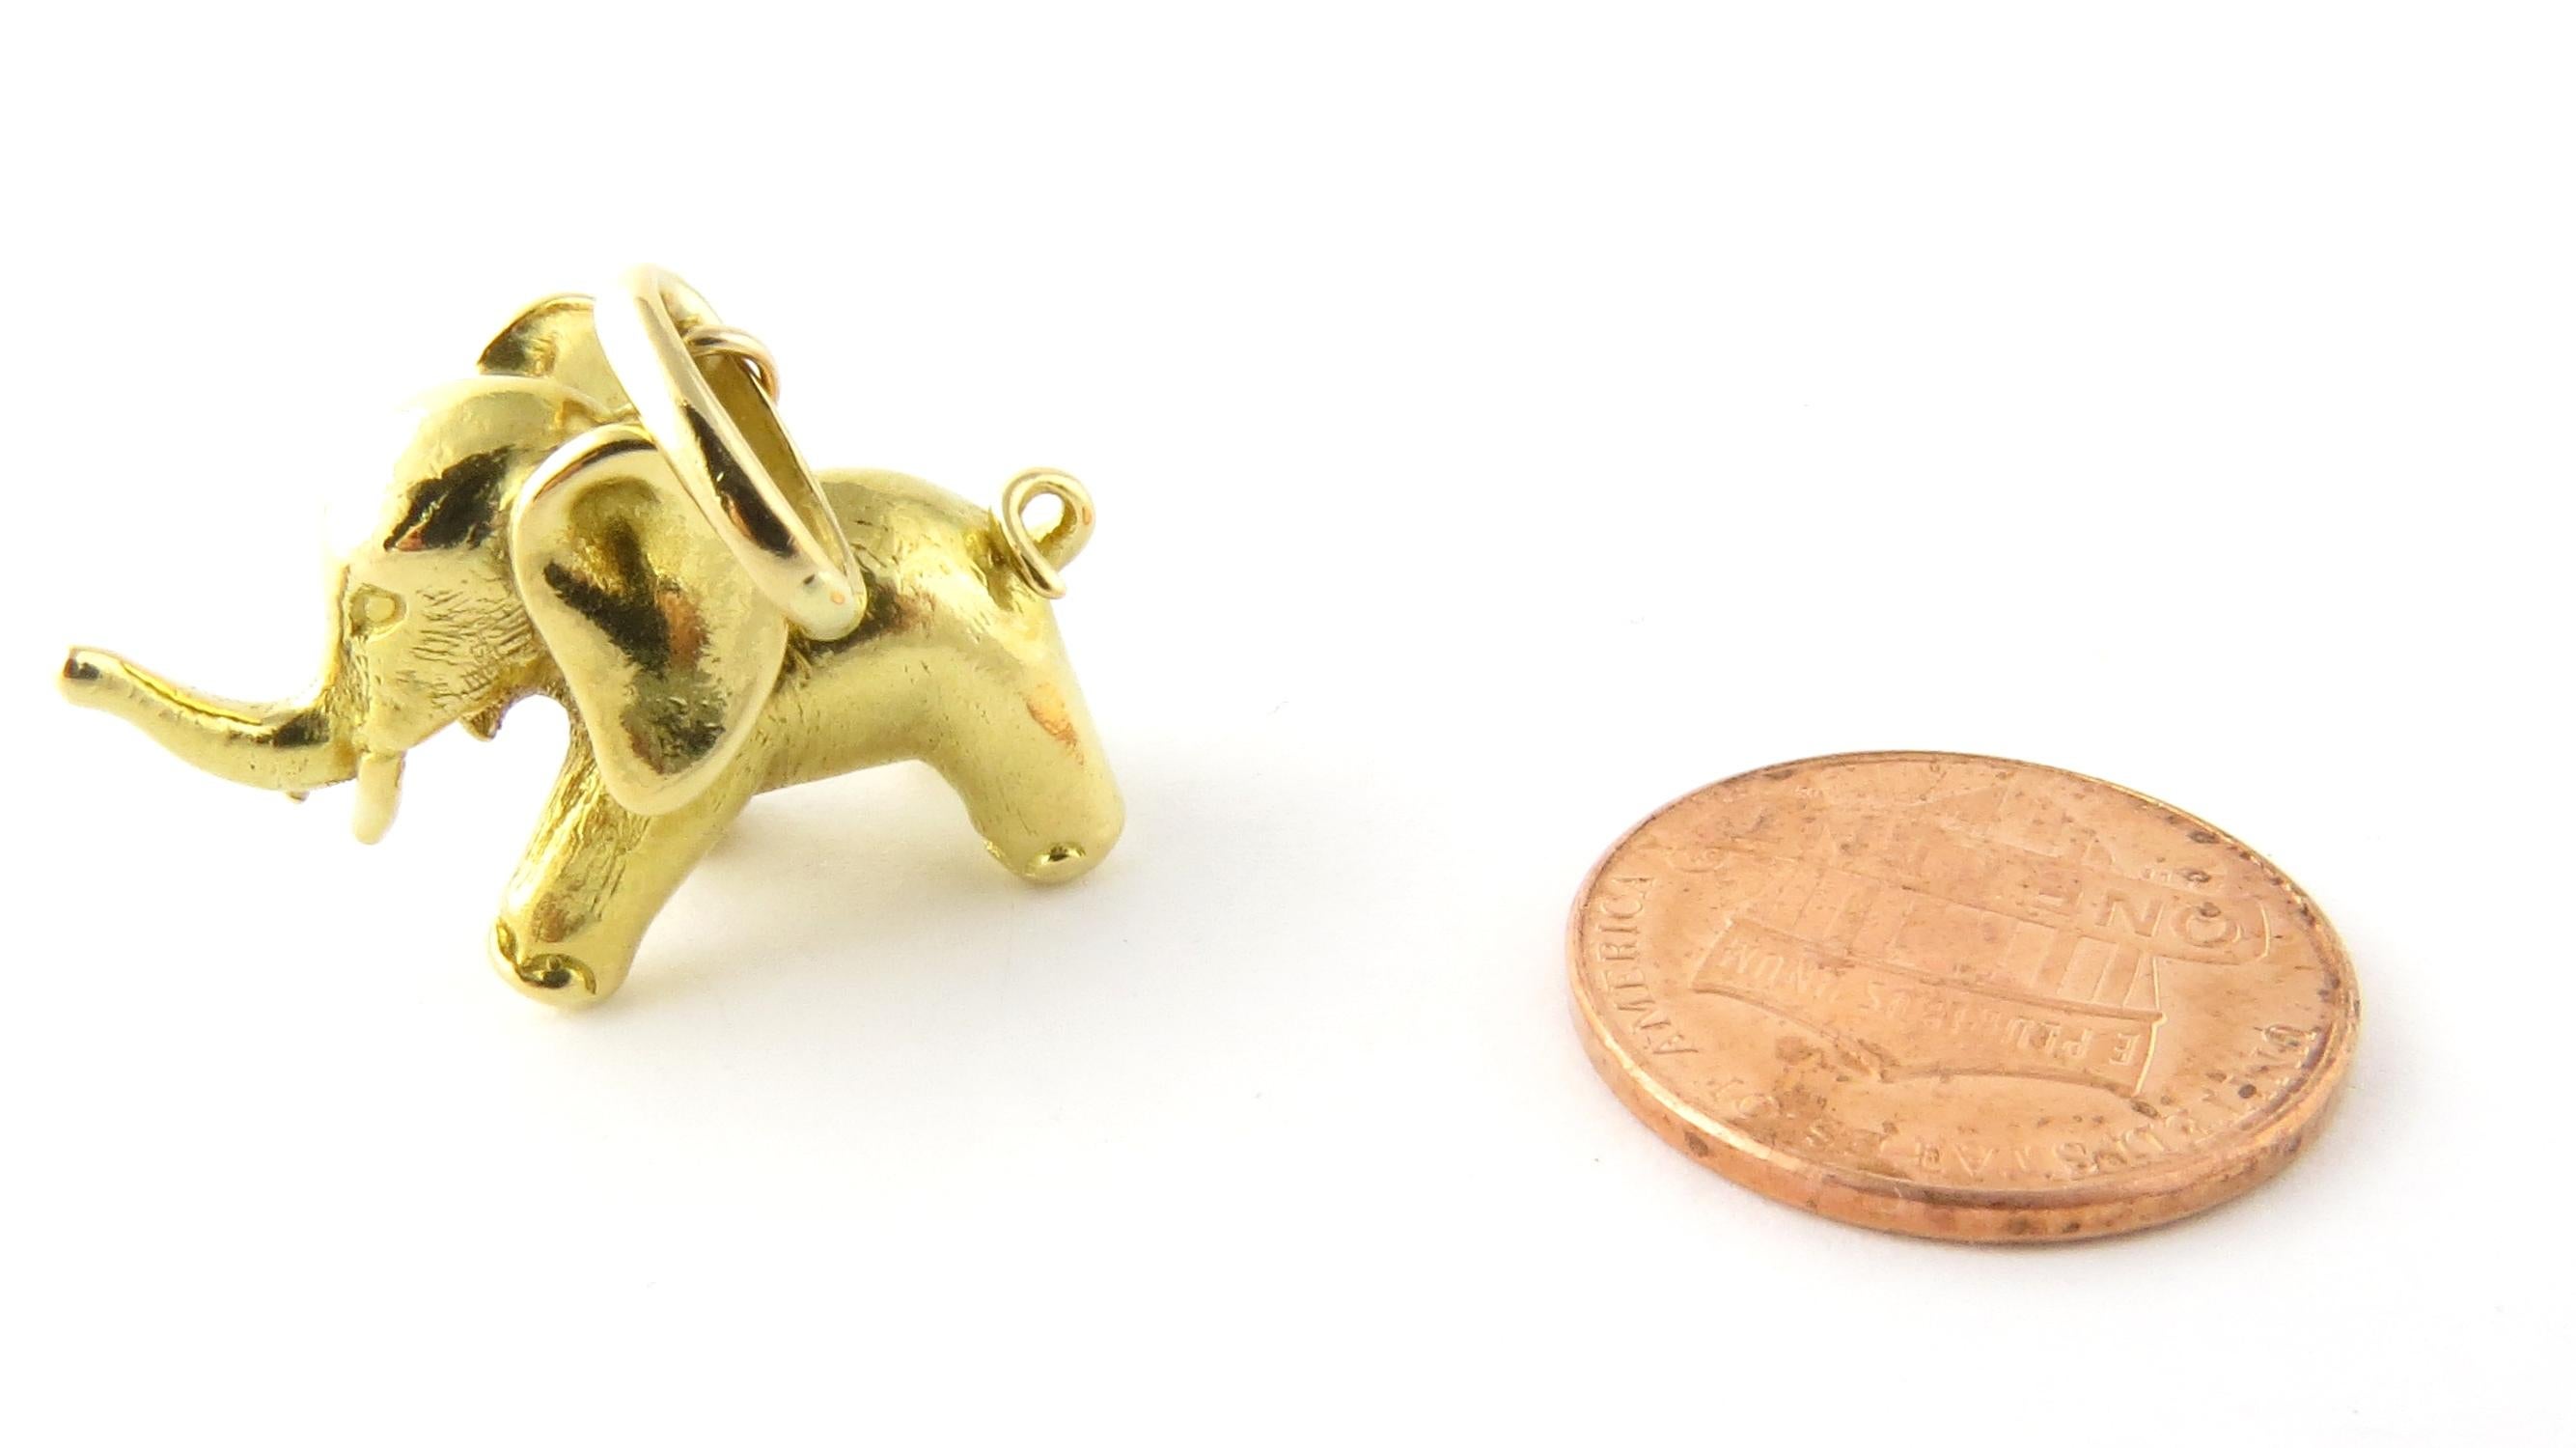 Vintage 18 Karat Yellow Gold Elephant Charm

The ultimate good luck charm!

This adorable 3D elephant with raised trunk is beautifully detailed in 18K yellow gold.

Size: 17 mm x 25 mm

Weight: 5.2 dwt. / 8.1 gr.

Stamped: 750

Very good condition,